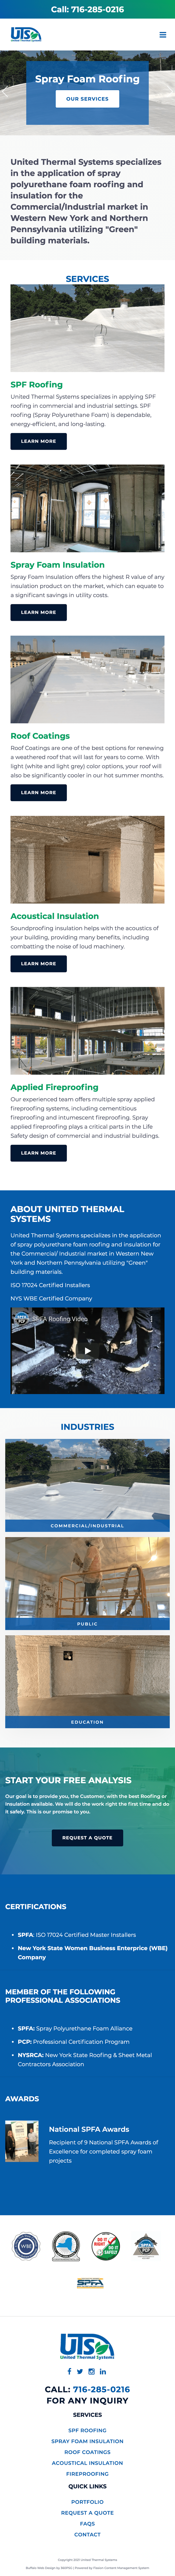 United Thermal Systems Website - Mobile